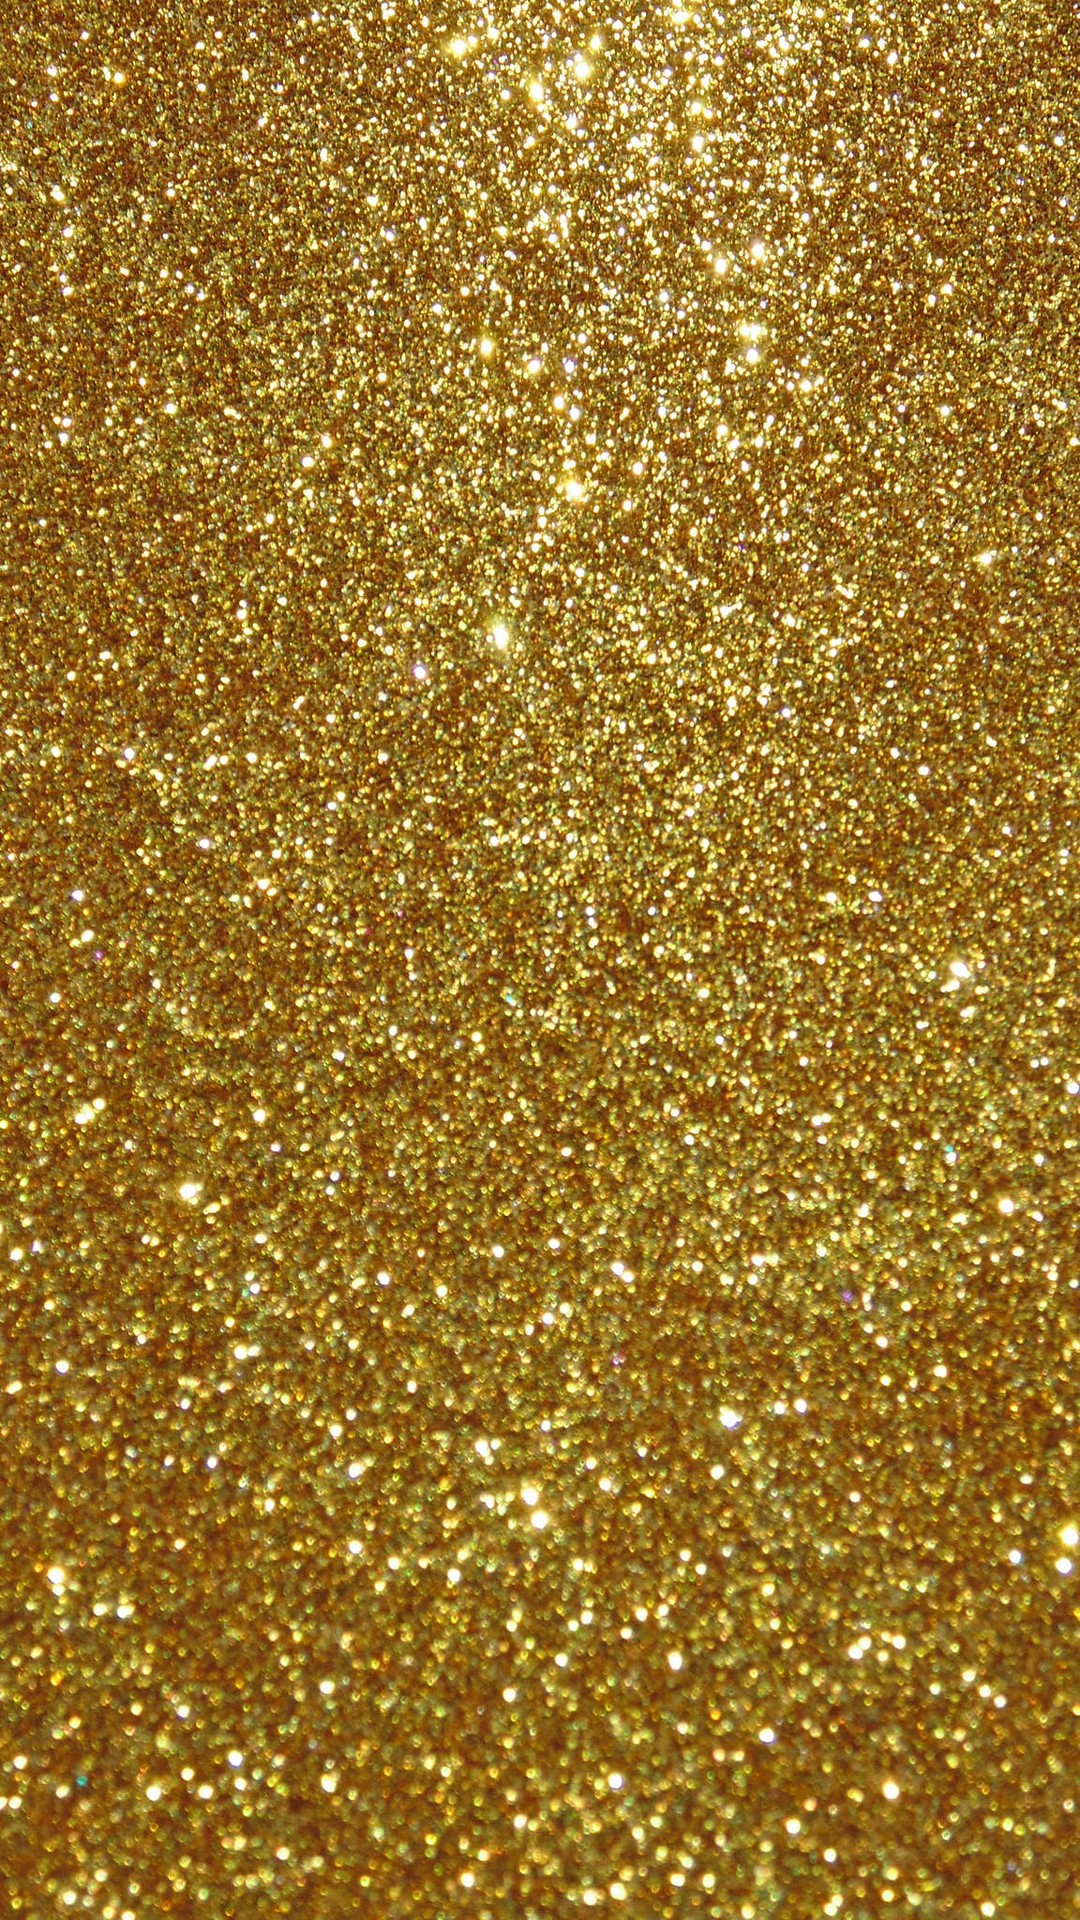 Gold Glitter Wallpaper For iPhone resolution 1080x1920